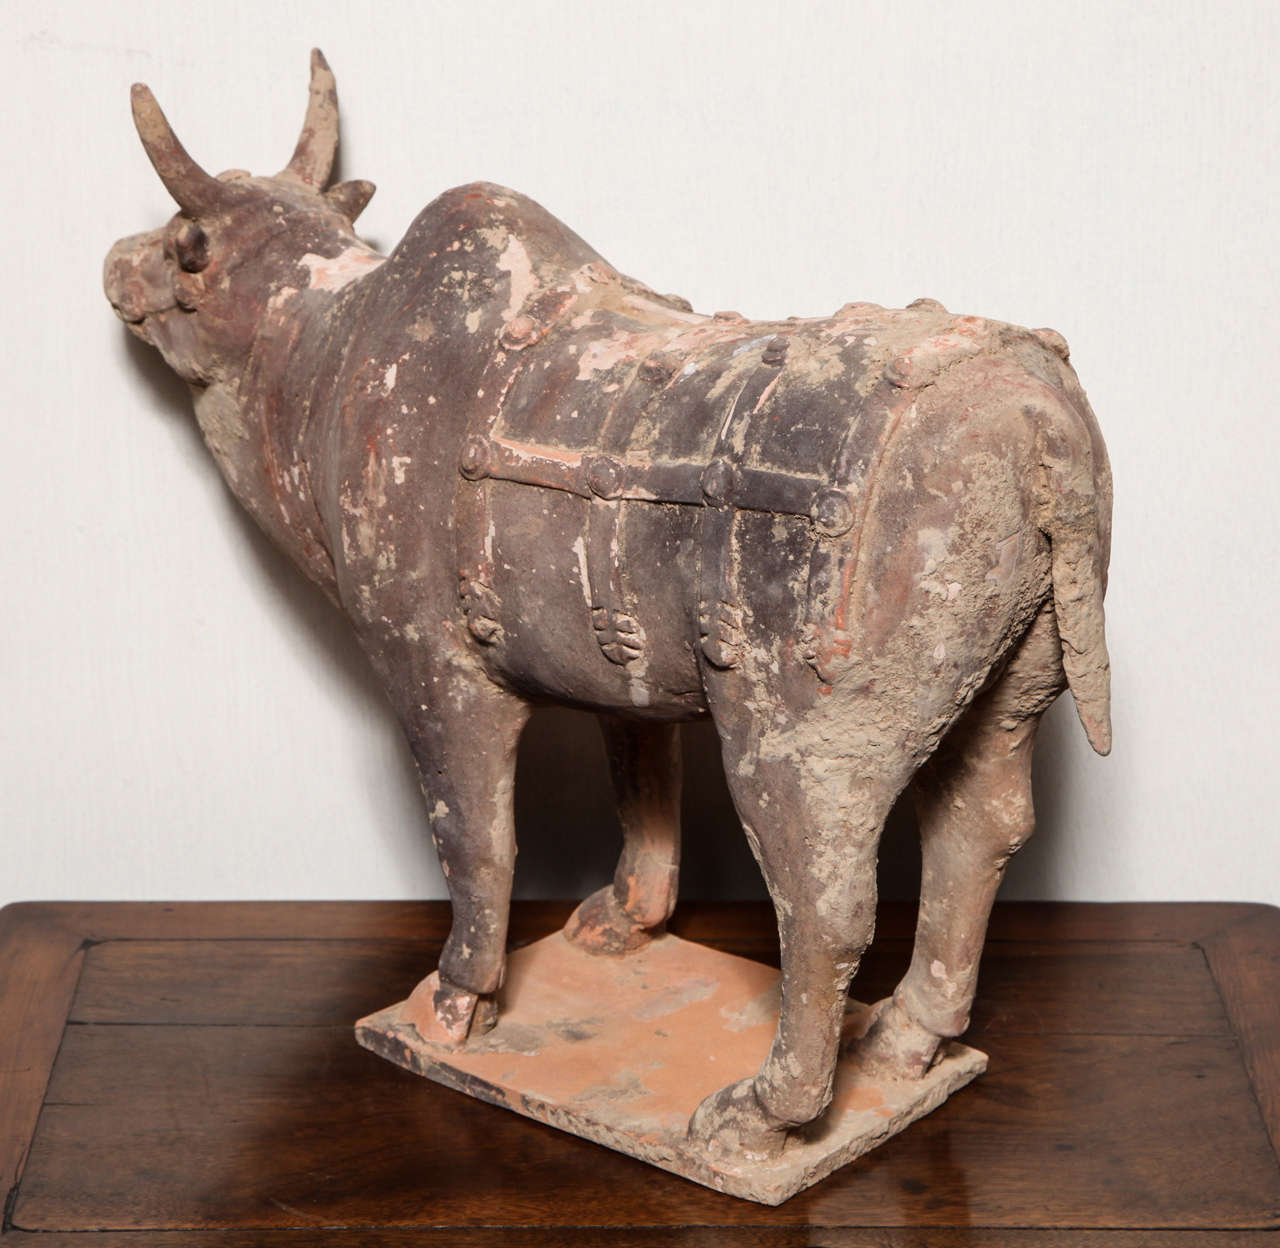 18th Century and Earlier Tang Dynasty Painted Terracotta Animal Figure from China, circa 618-907 A.D